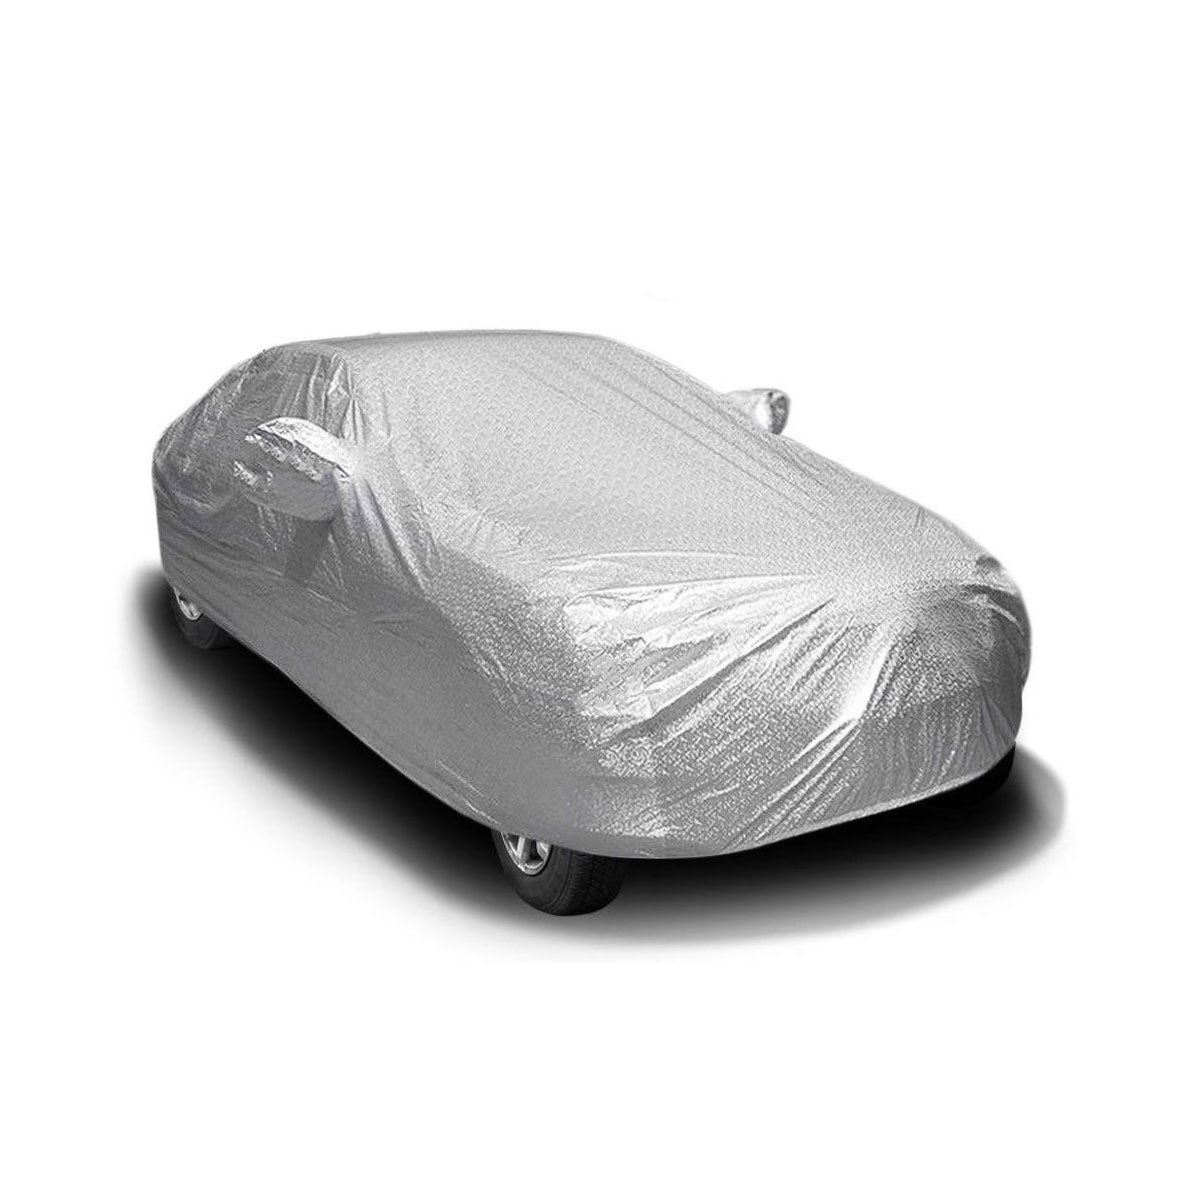 Oshotto Spyro Silver Anti Reflective, dustproof and Water Proof Car Body Cover with Mirror Pockets For Toyota Etios Cross